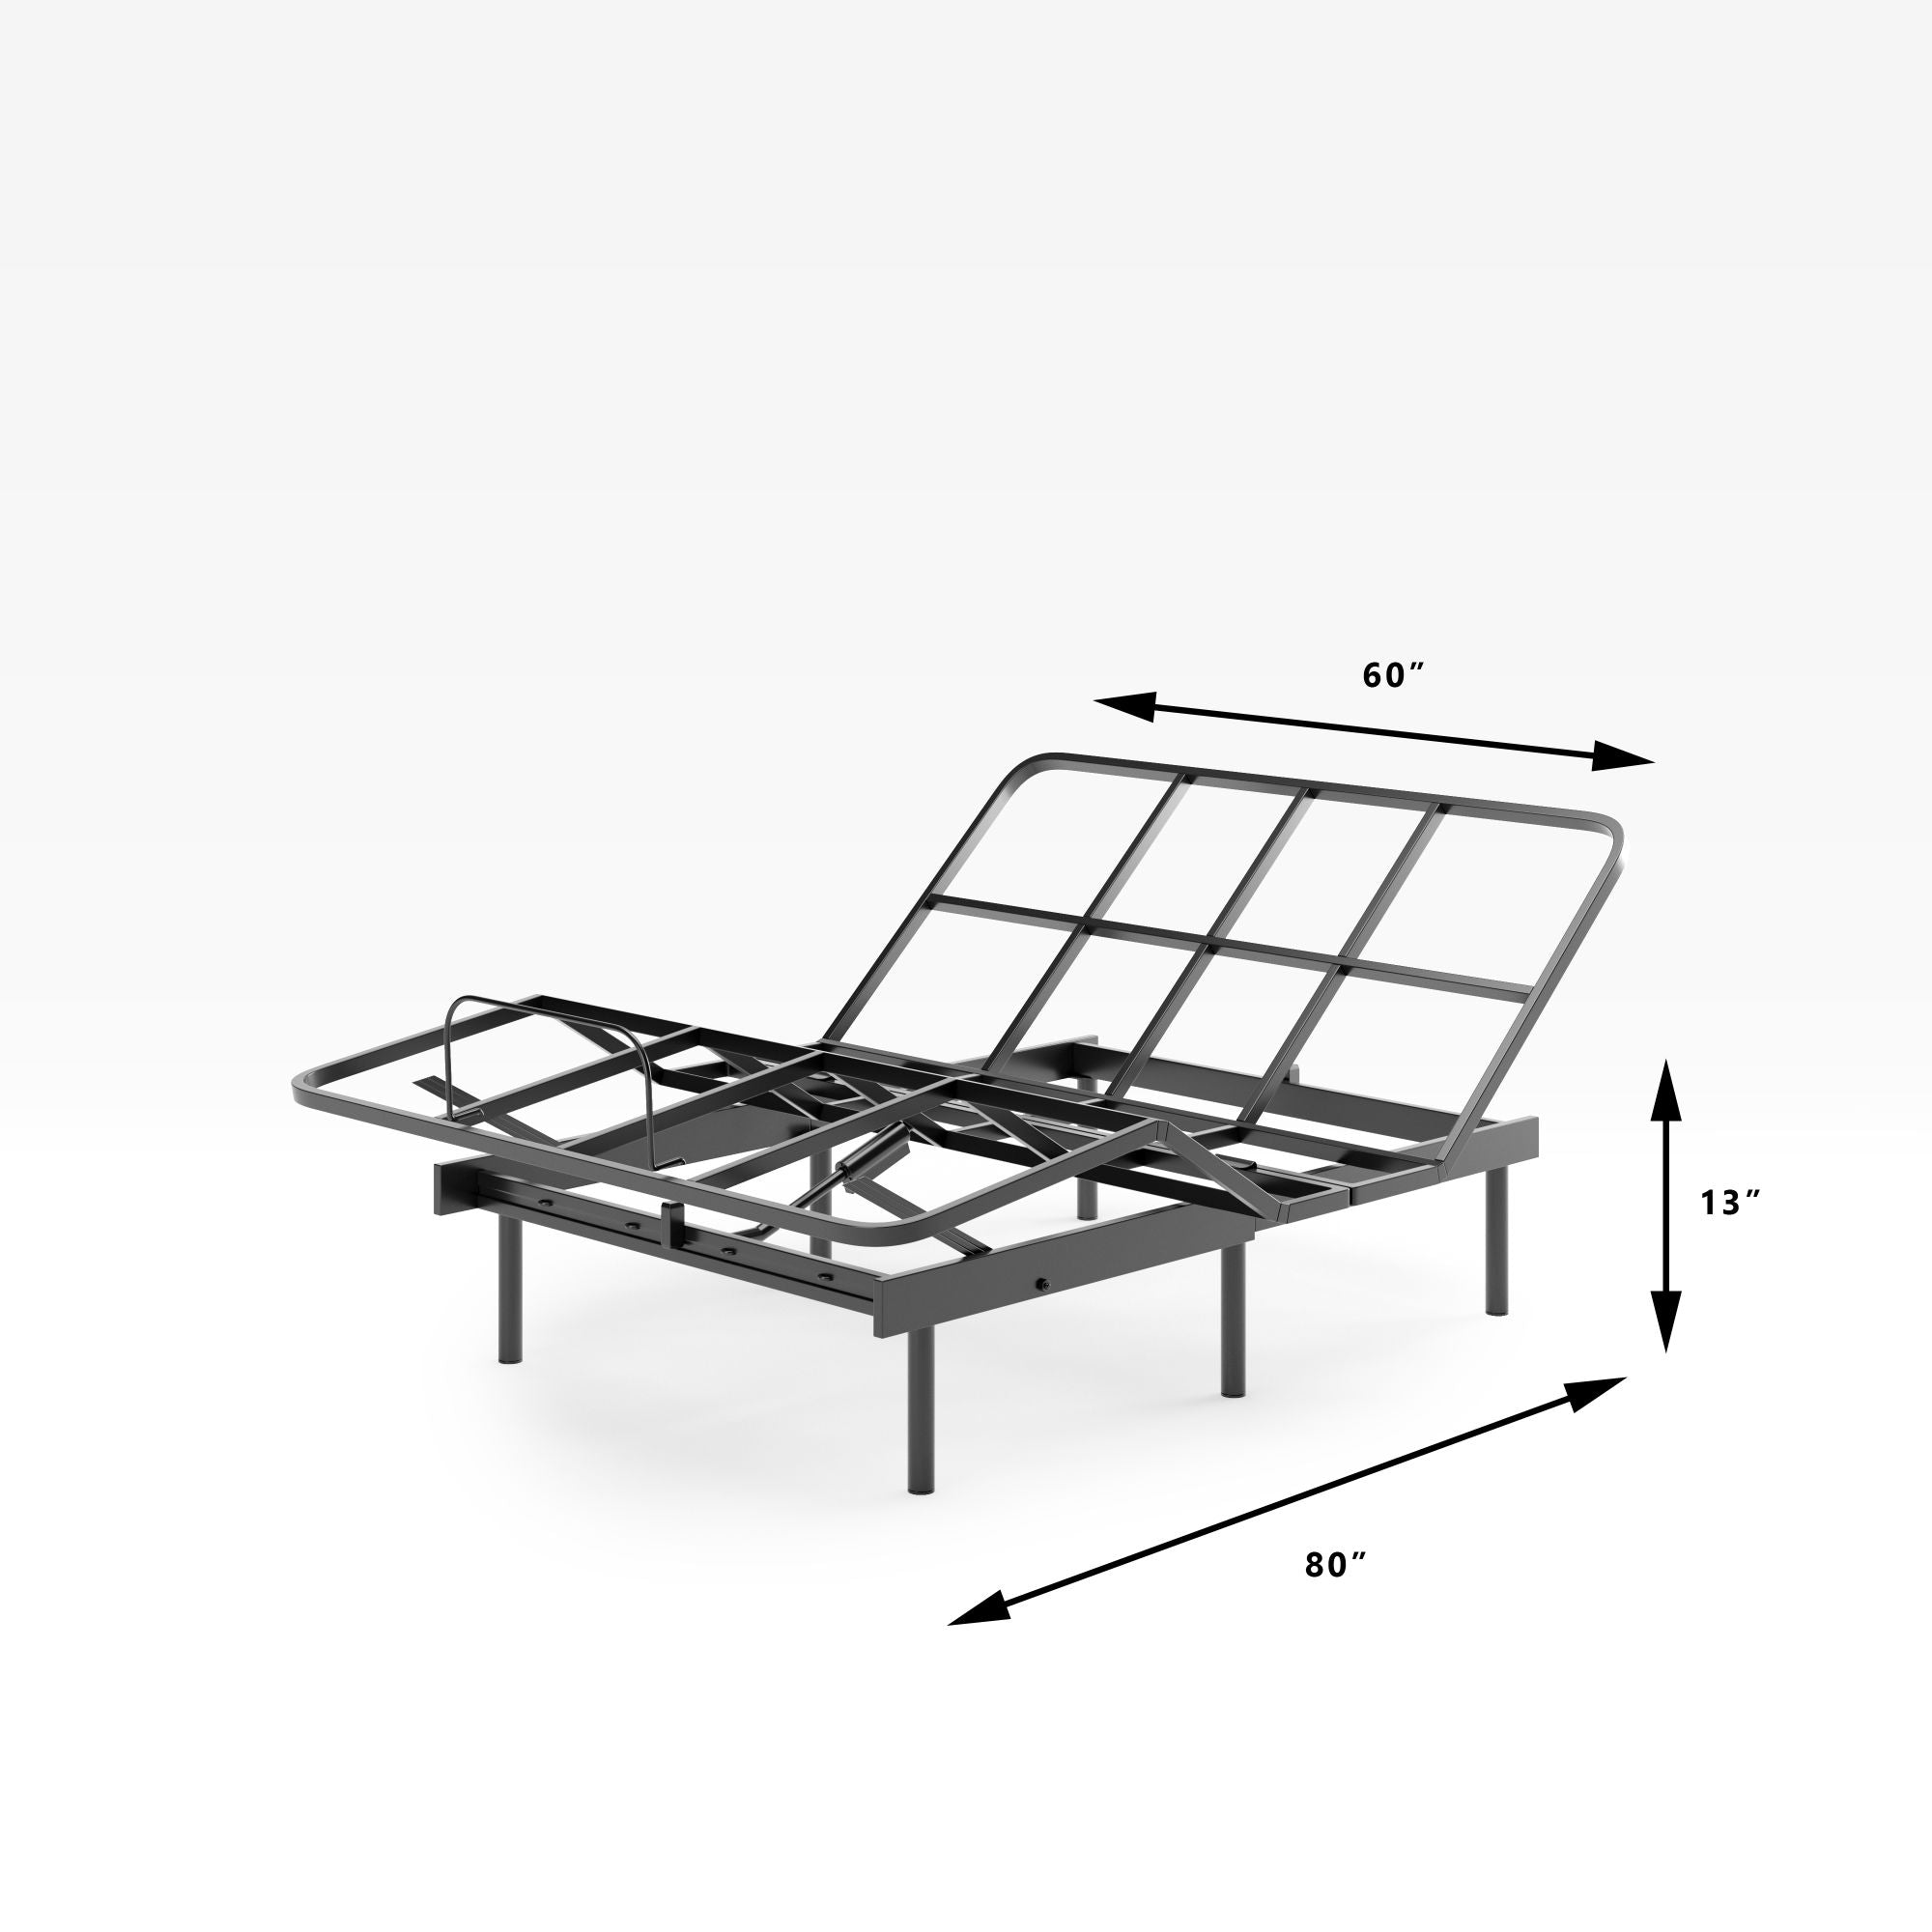 Adjustable Metal Bed Frame with Head and Foot Incline